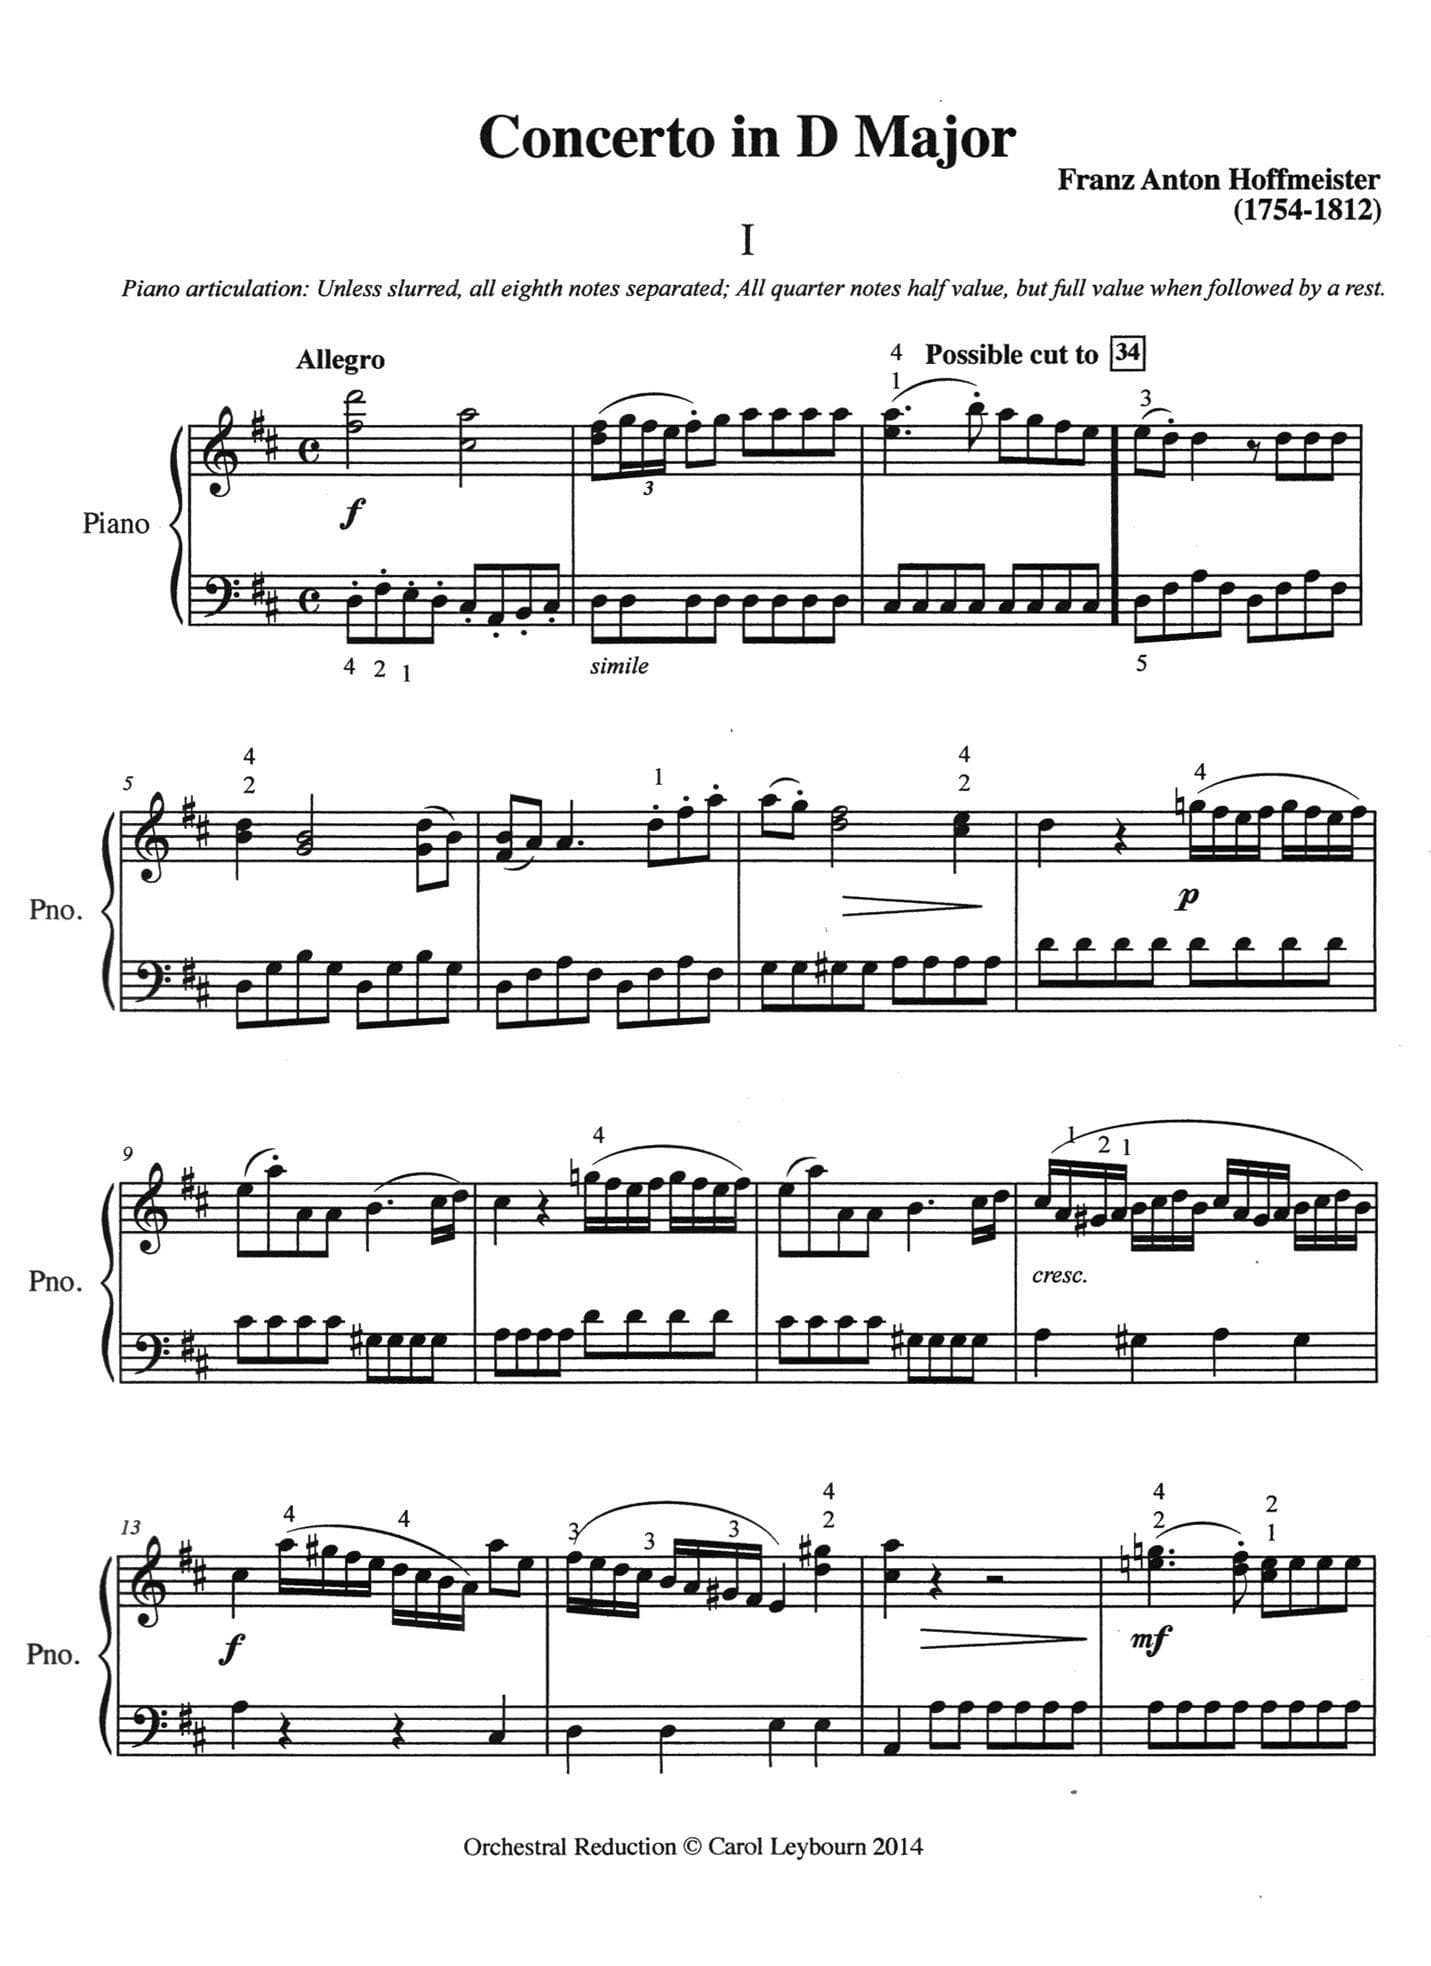 Viola Concertos (Volume 2) - Hoffmeister, J. Schubert, and J.S. Bach - PIANO ACCOMPANIMENT ONLY - arranged by Carol Leybourn - Frustrated Accompanist Edition